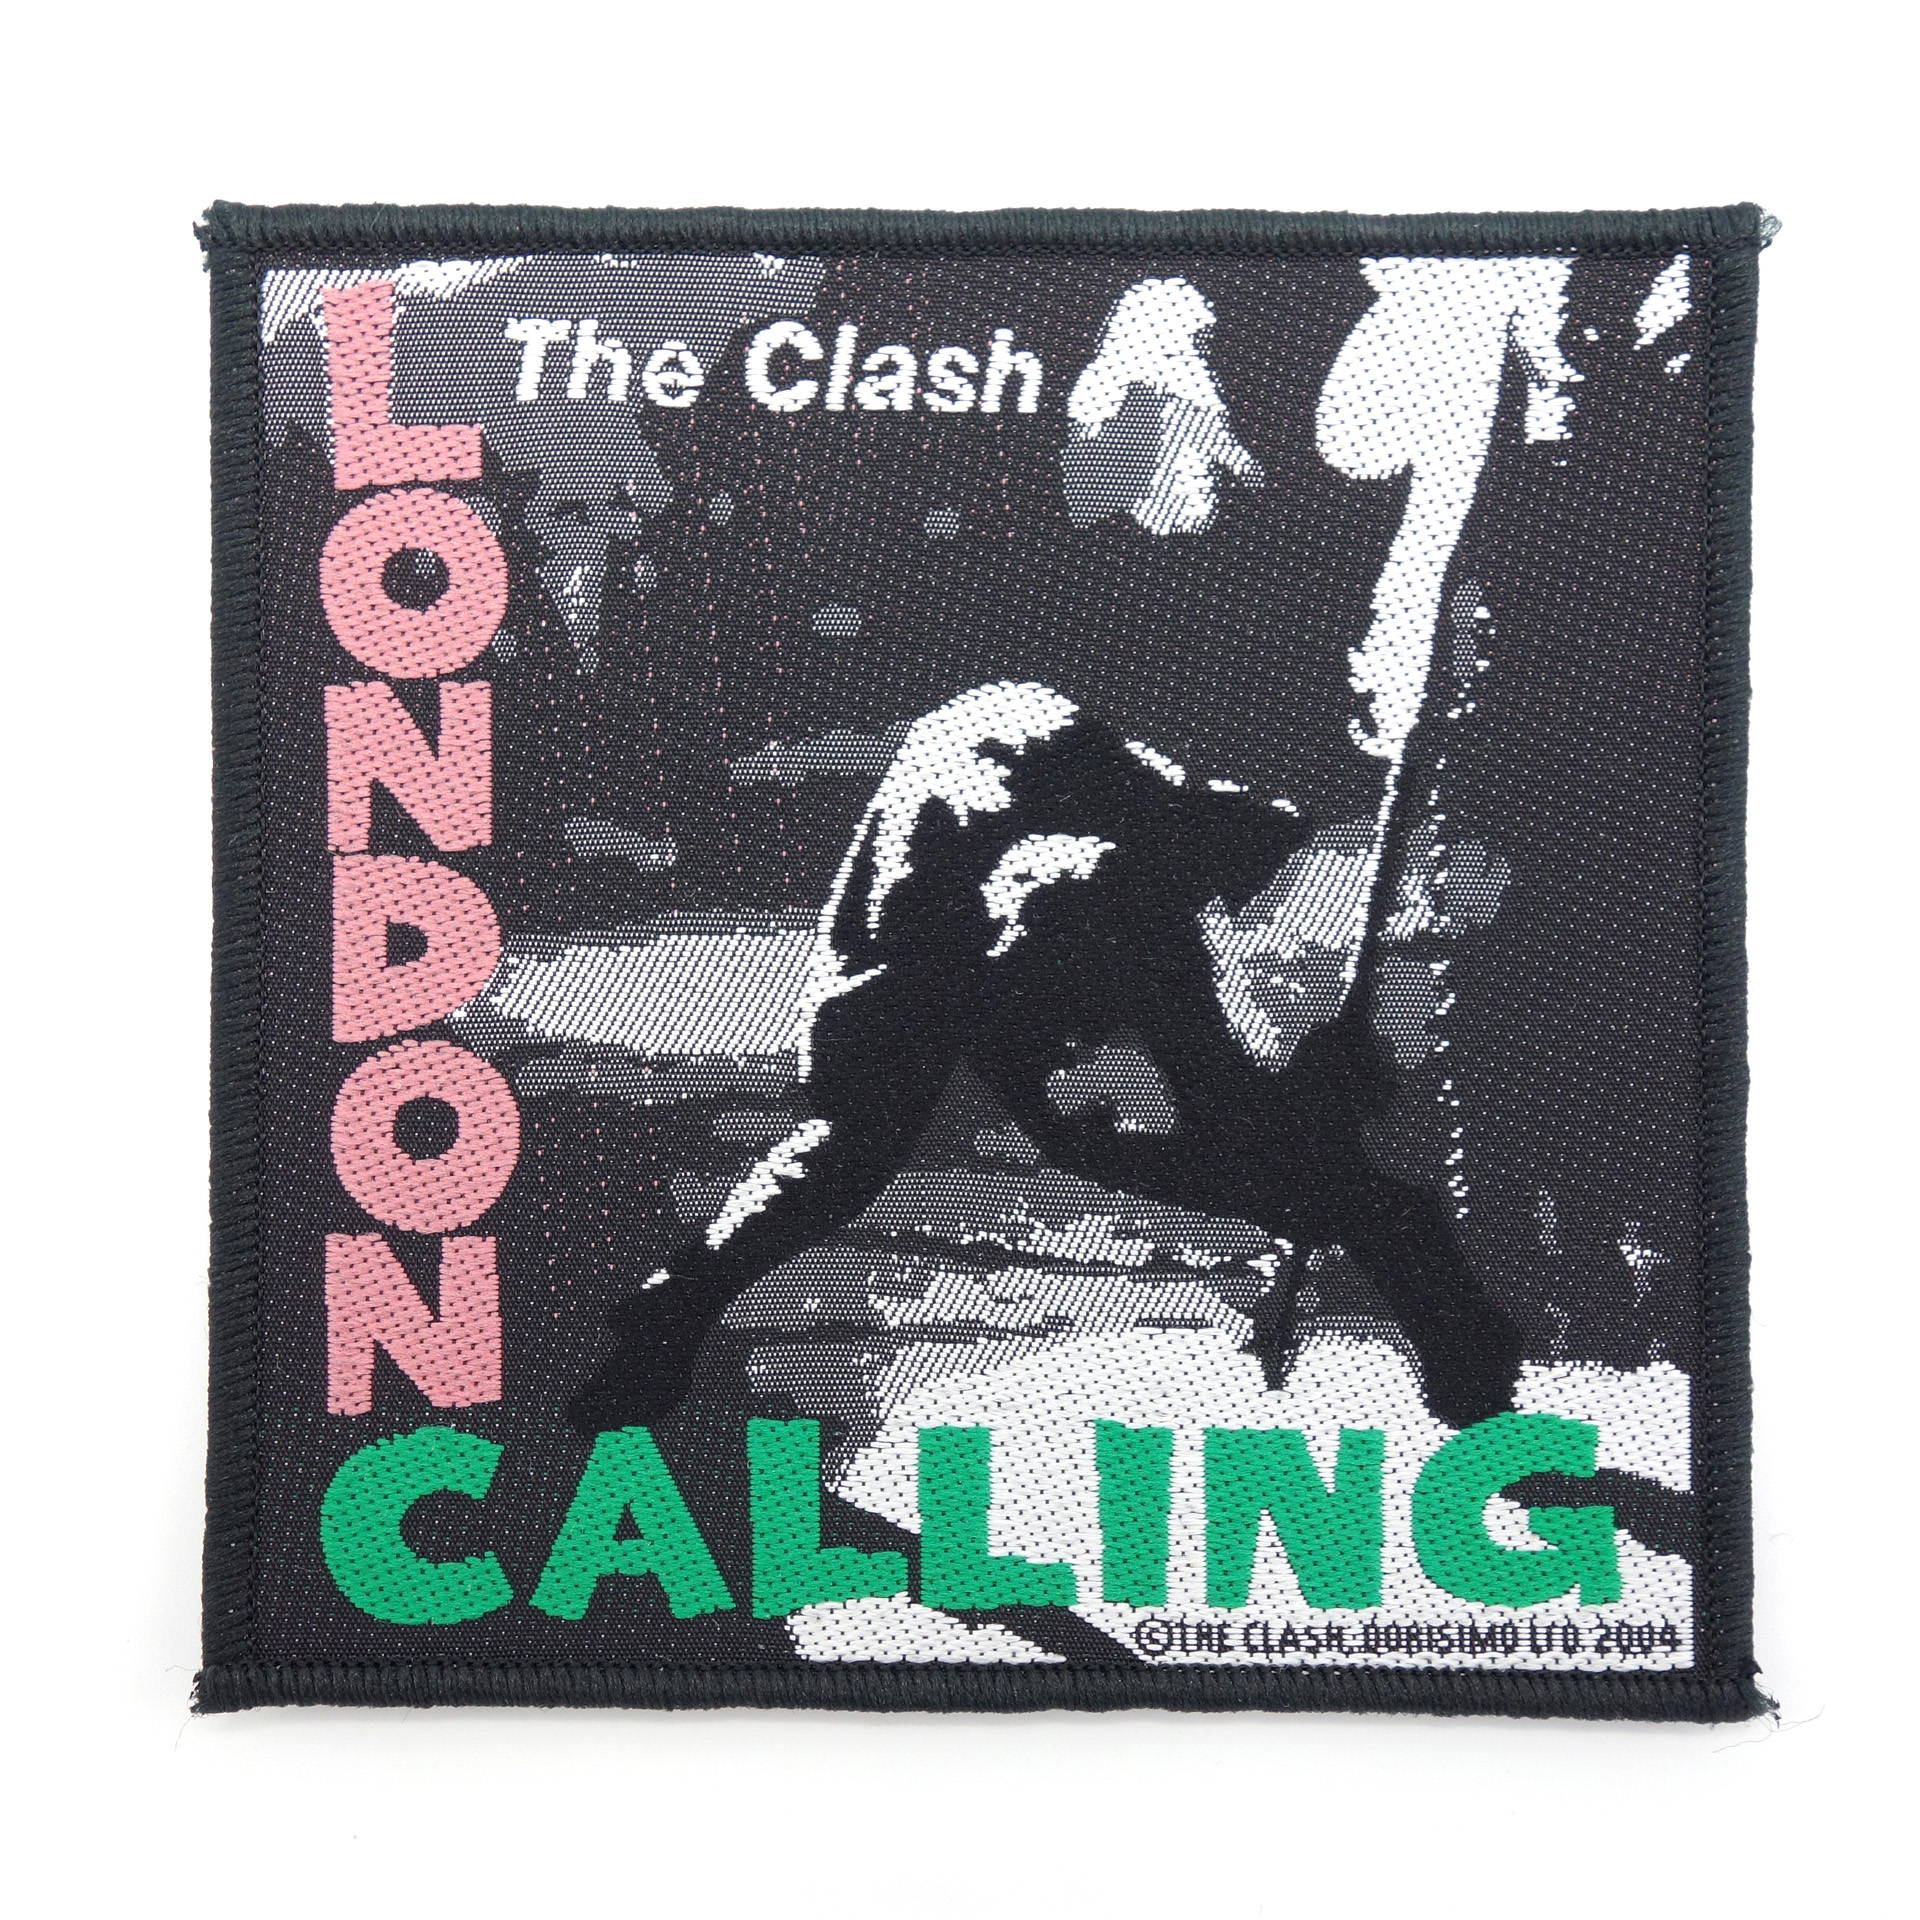 Band Patch The Clash London Calling Aufnäher